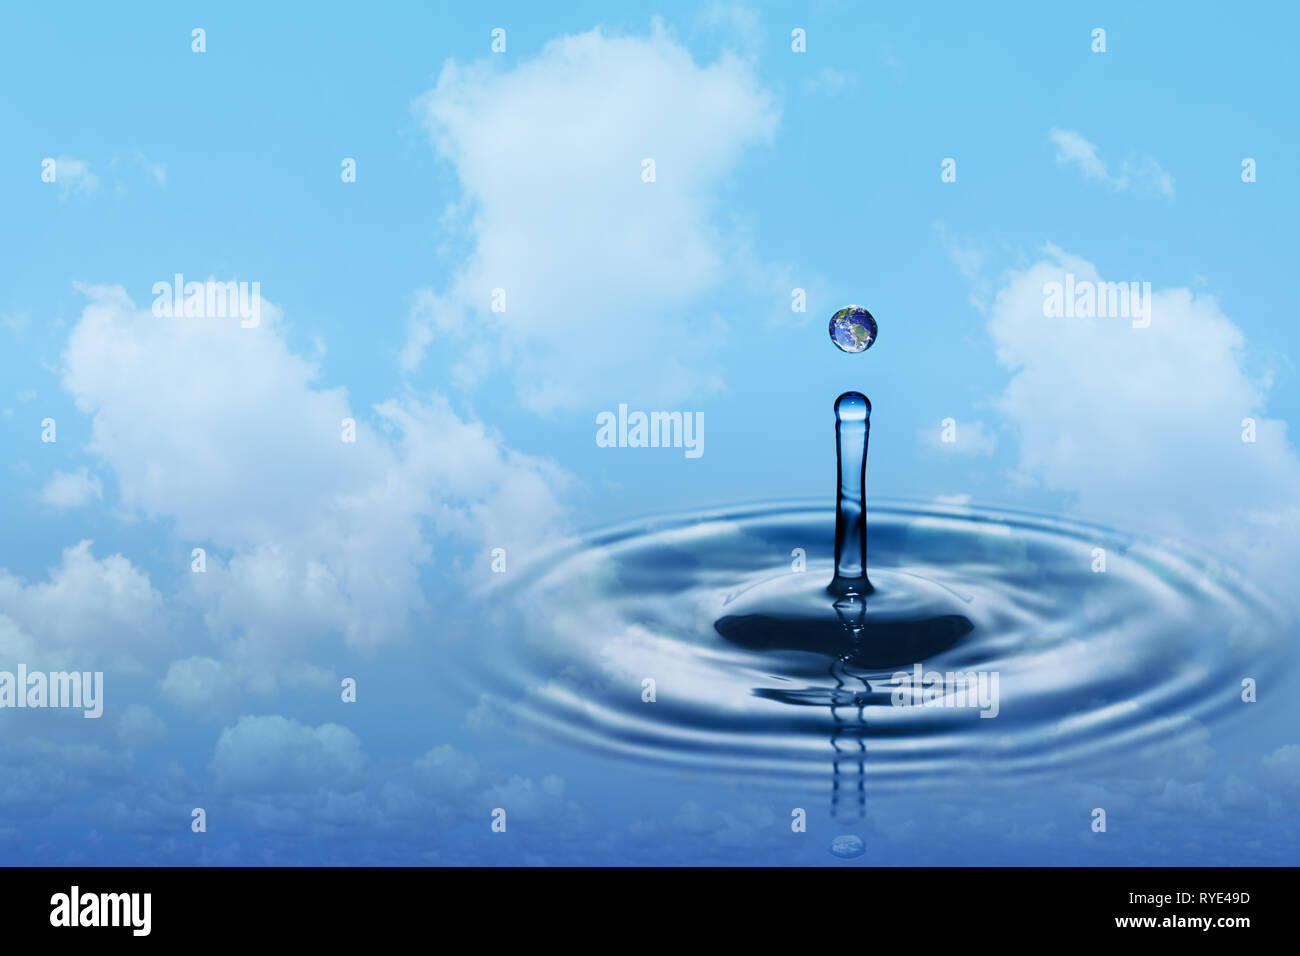 Drop of rain with earth image falling on smooth water surface. Blue sky and white clouds in background. Stock Photo